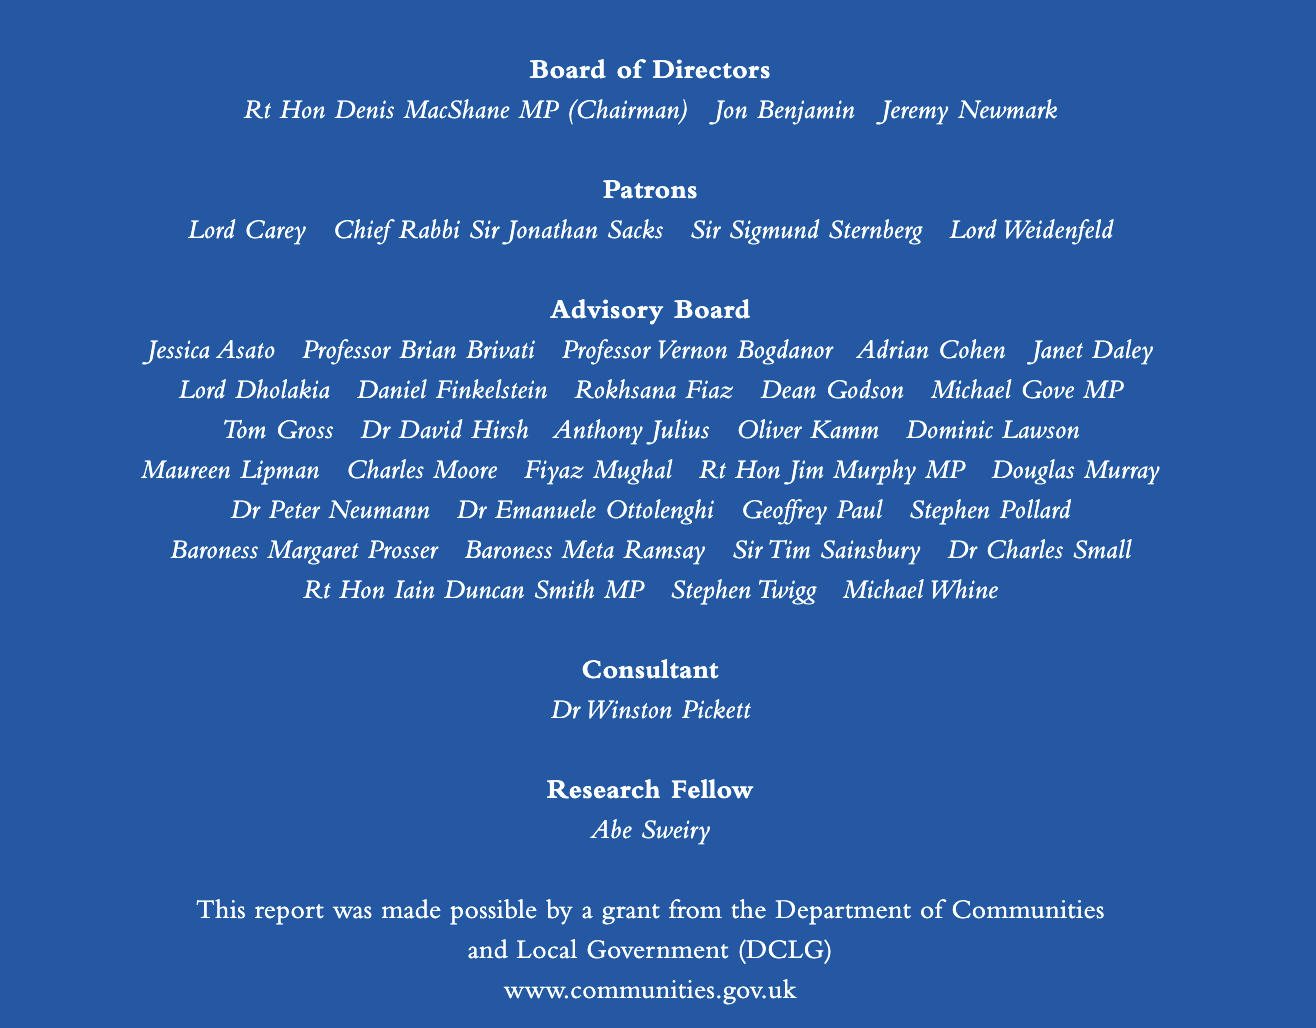 European Institute for the Study of Contemporary Antisemitism directors, advisors and staff circa 2009.  Screenshot from the inside front cover of Understanding and Addressing The ‘Nazi card’: Intervening Against Antisemitic Discourse, by Paul Iganski and Abe Sweiry, July 2009